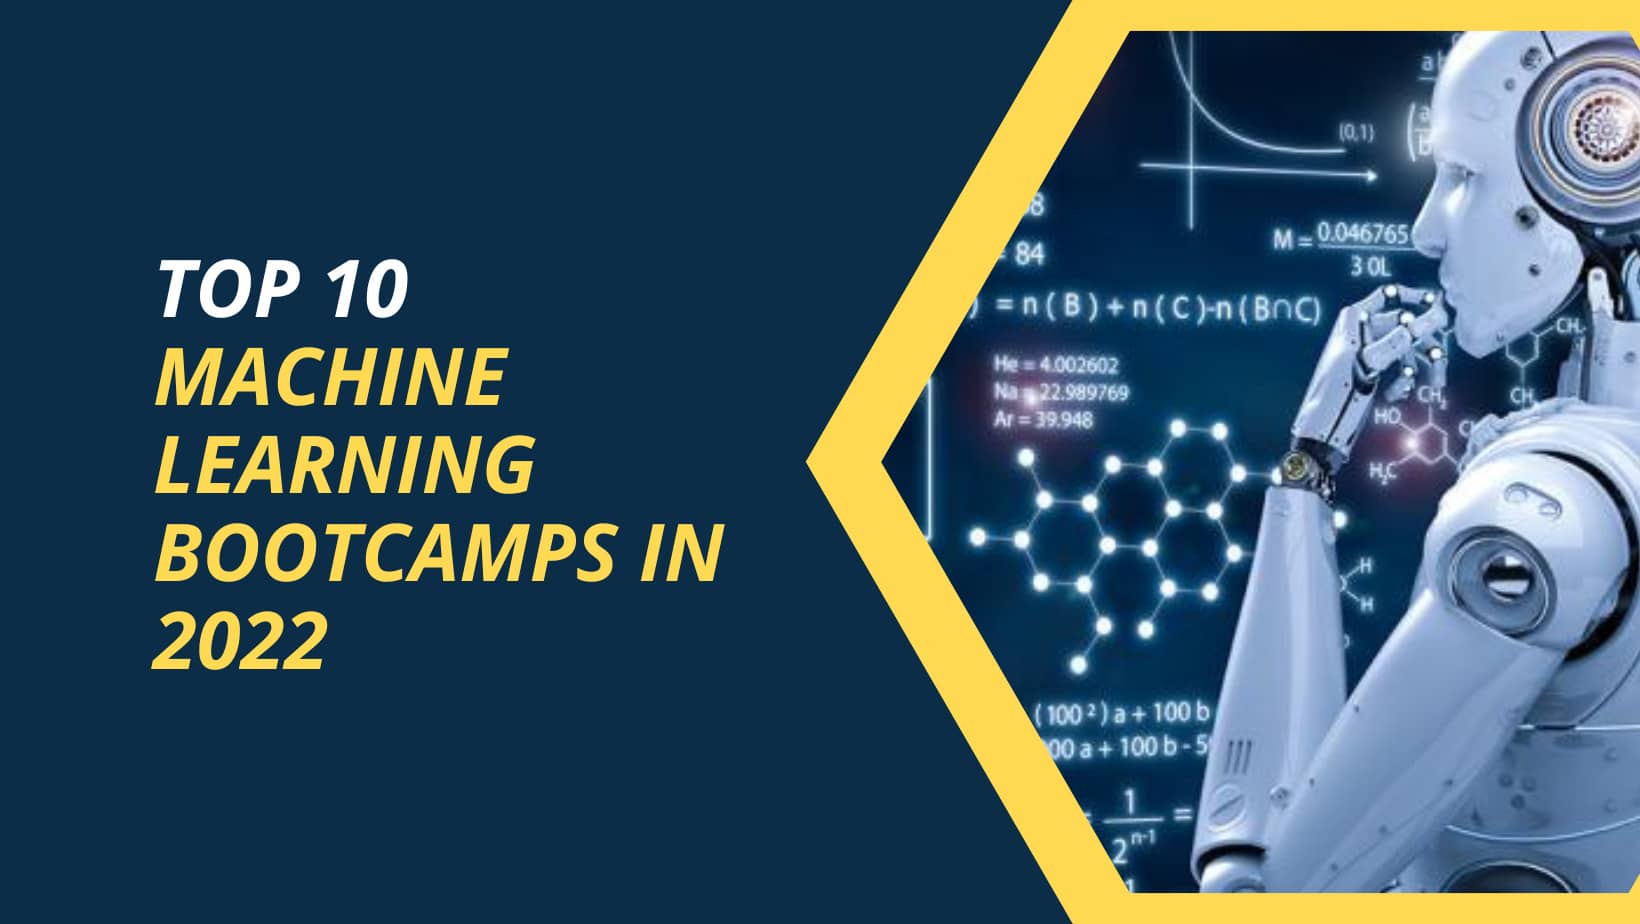 TOP 10 MACHINE LEARNING BOOTCAMPS IN 2022